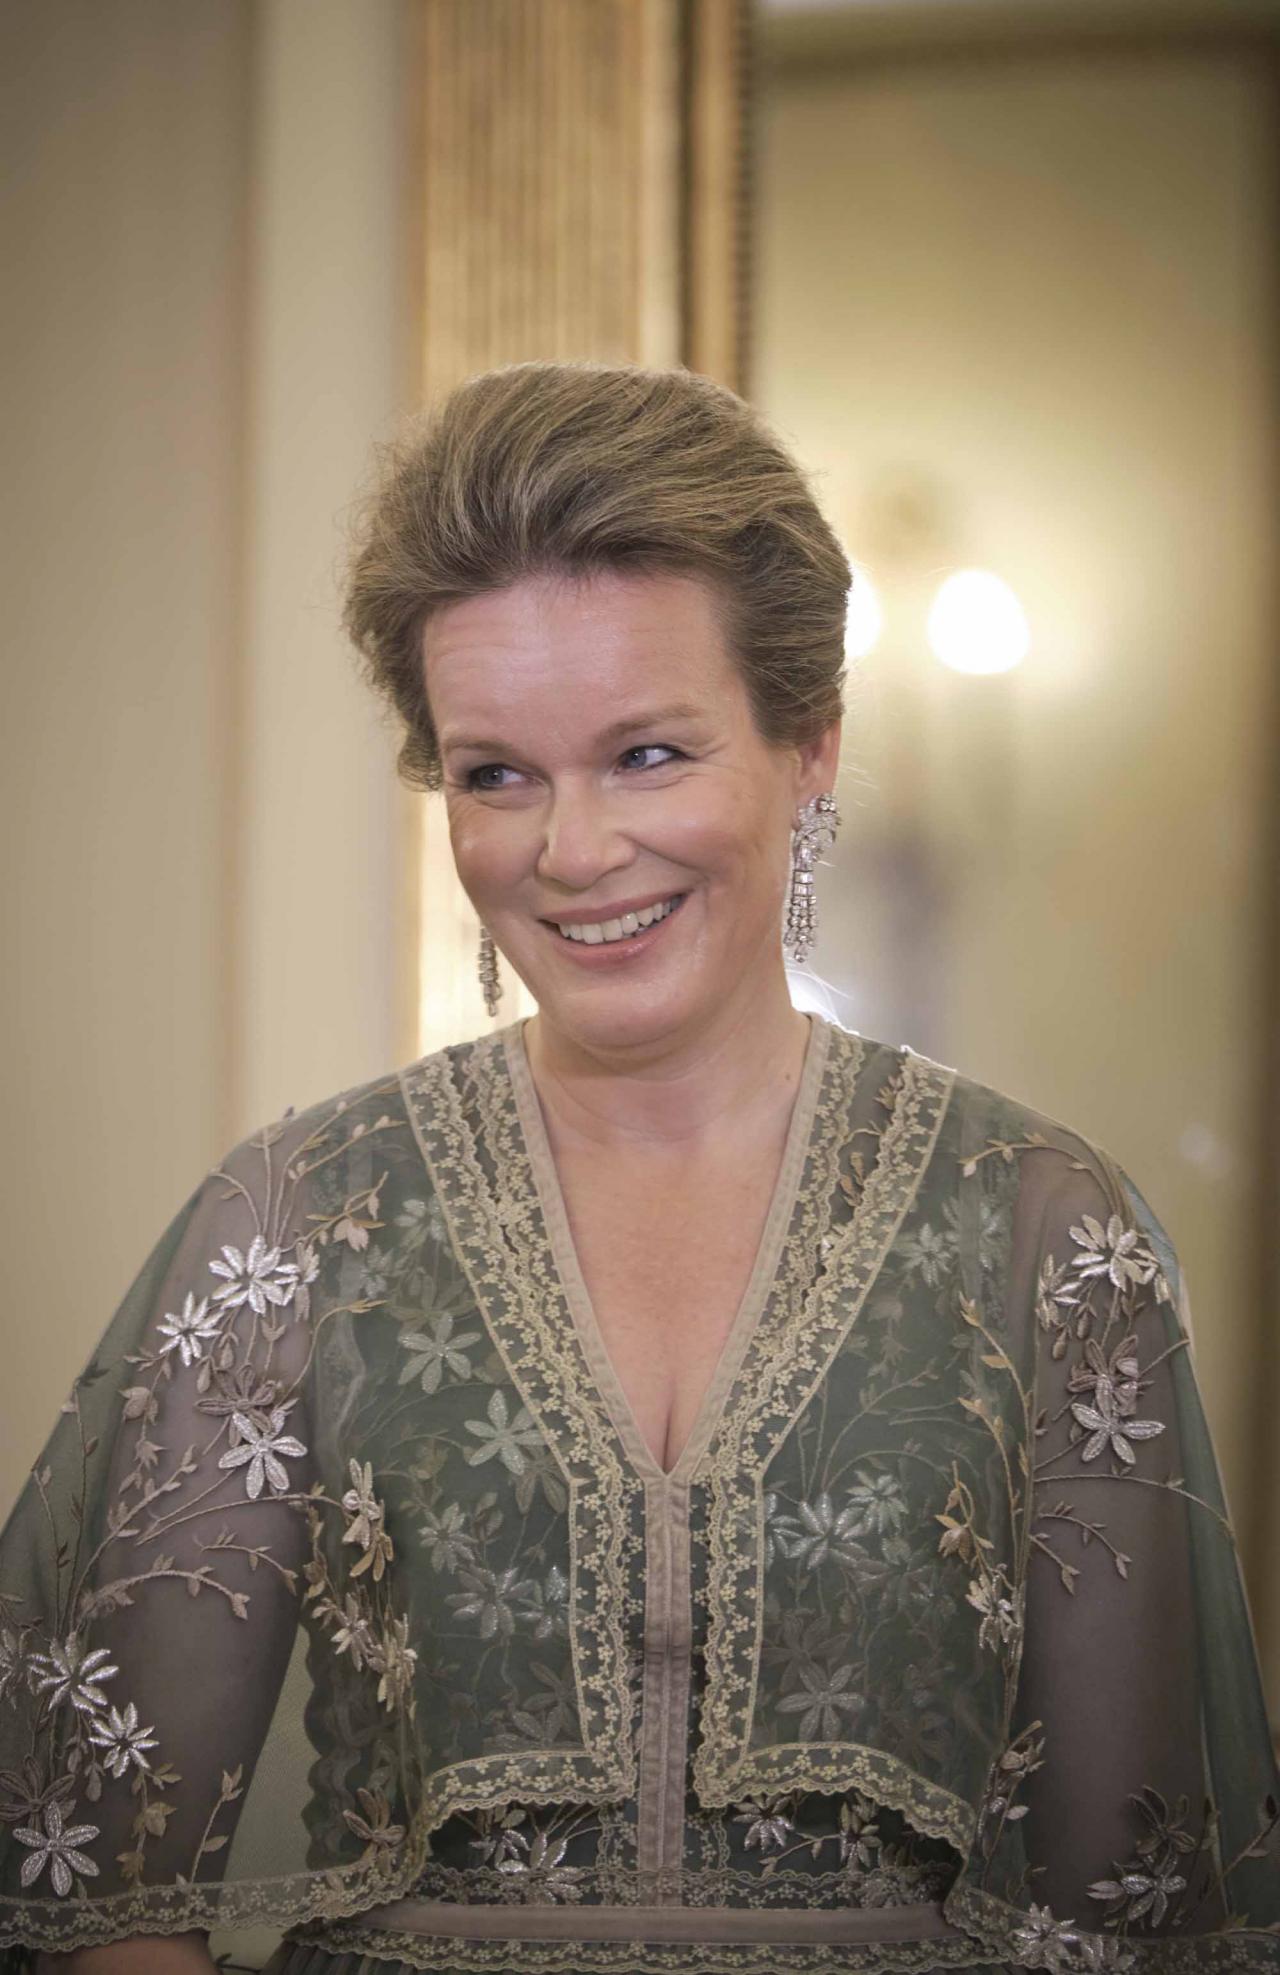 Queen Mathilde of Belgium pictured at the start of a state dinner with president Sakellaropoulou on the first day of a three days state visit of the Belgian royal couple to Greece, Monday 02 May 2022, in Athens.
BELGA PHOTO POOL OLIVIER POLET